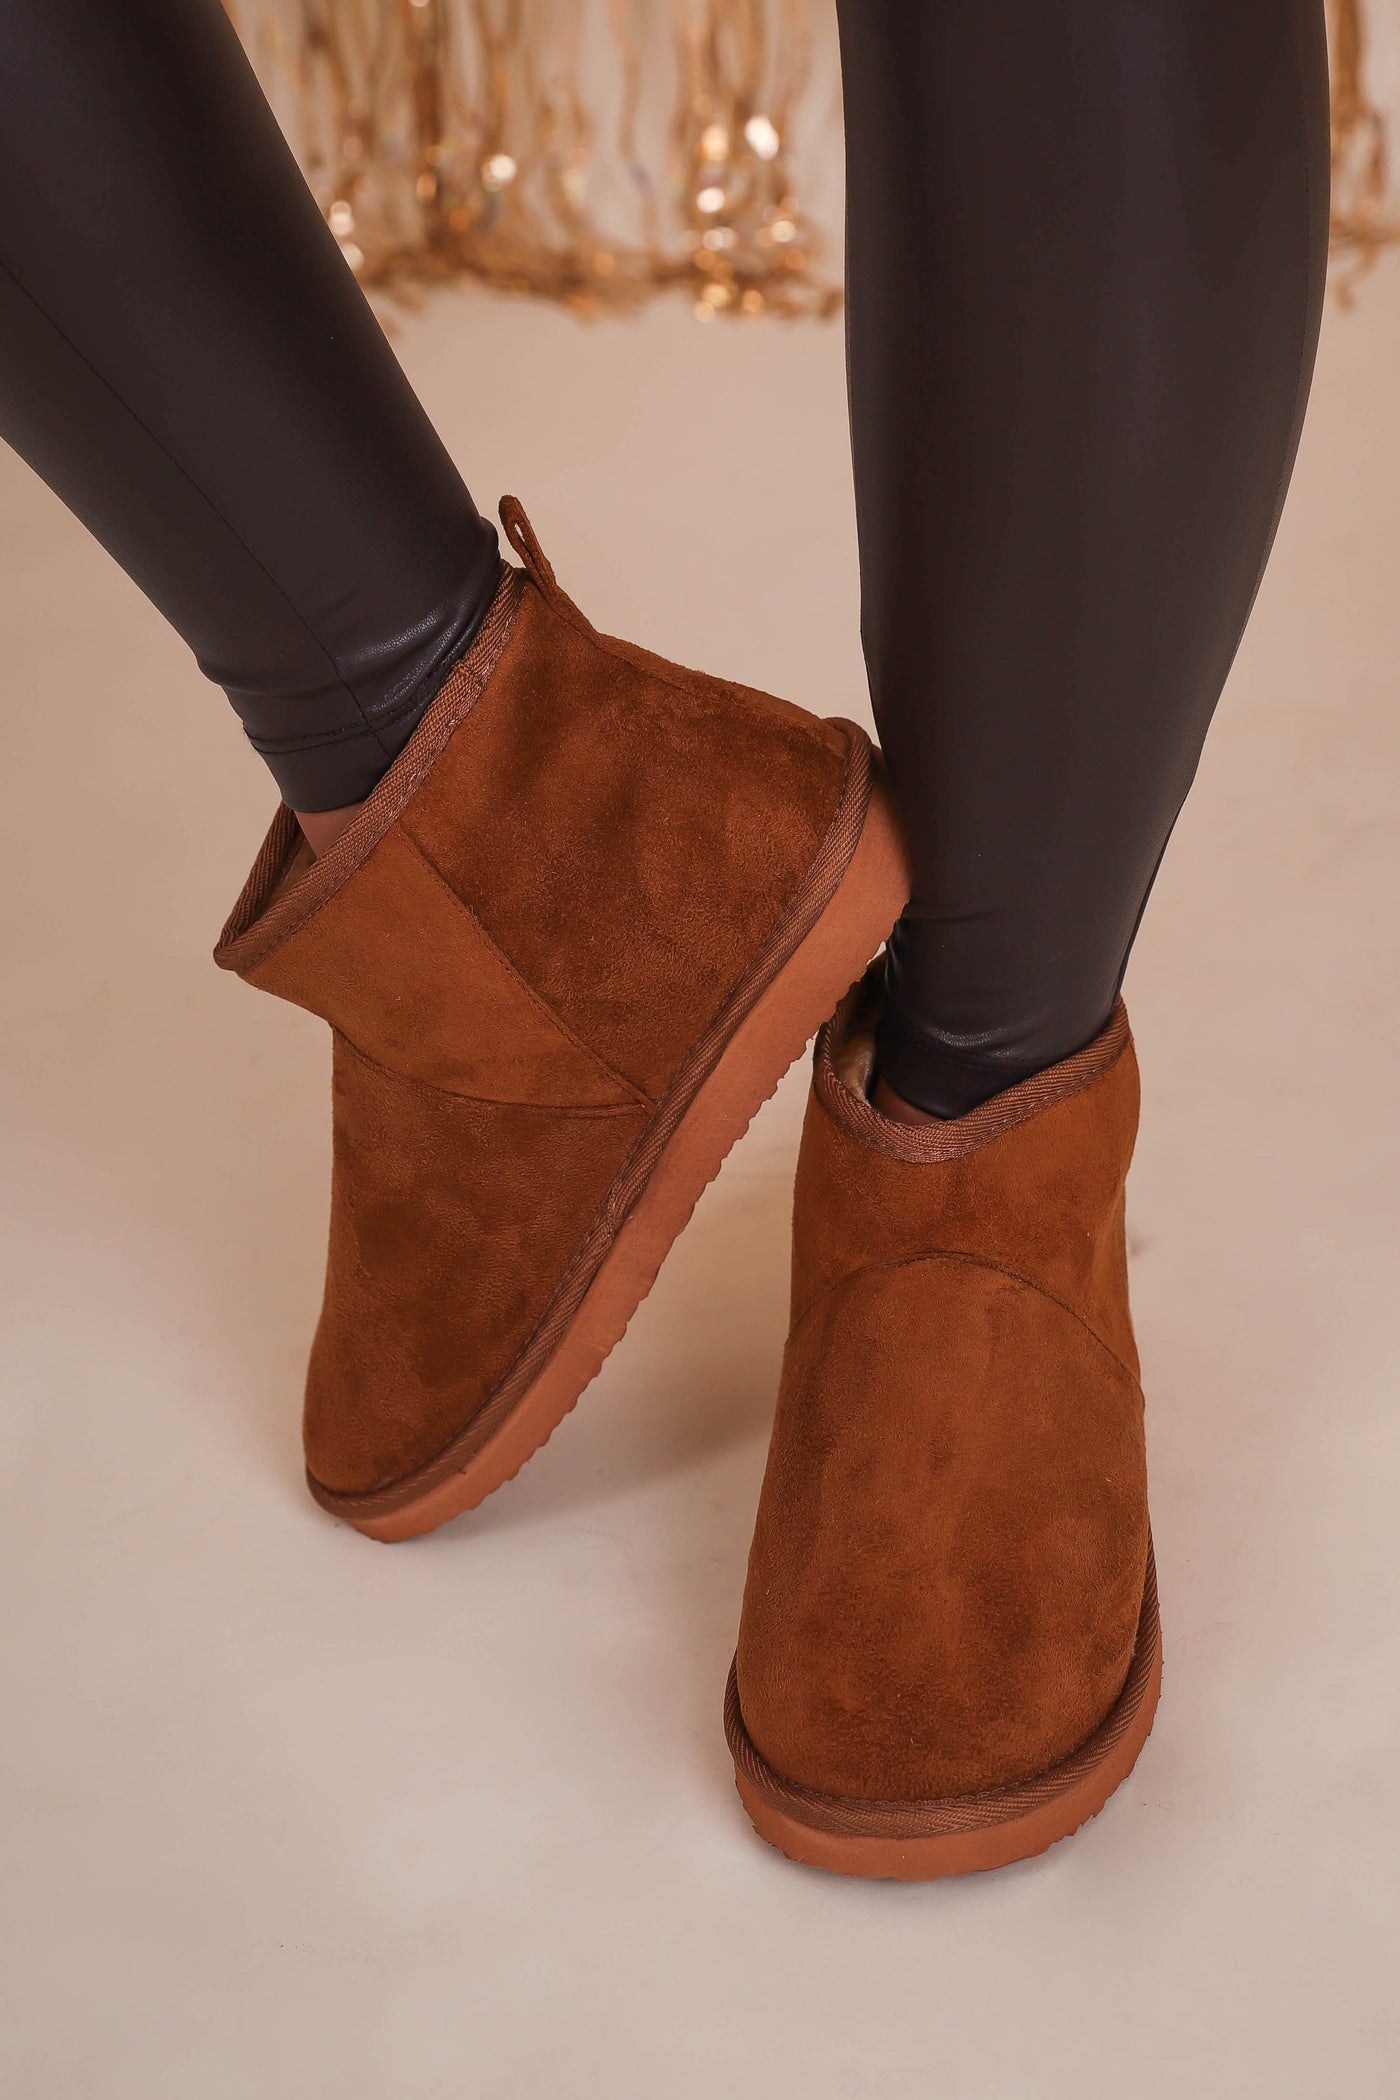 Women's Suede Boots with Fur Interior- Brown Mid Rise Slip On Boots- Outwoods Gallery 2 Boots